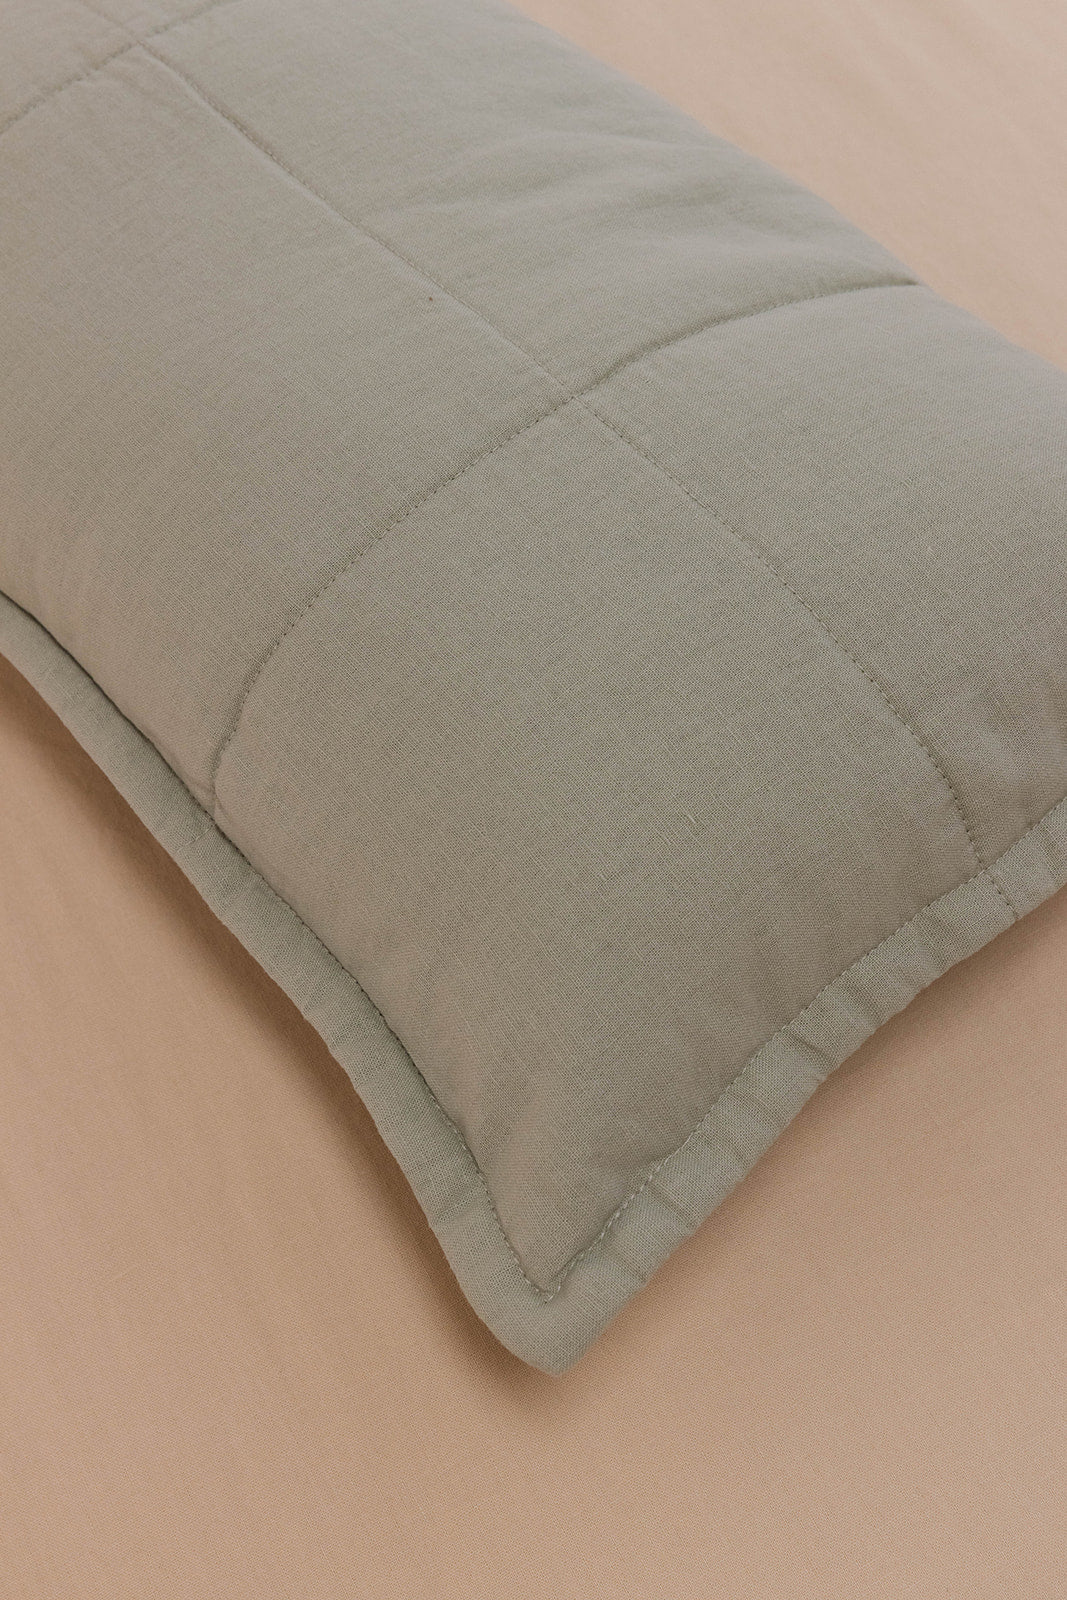 Turaco - Linen Quilted Sham & Pillow